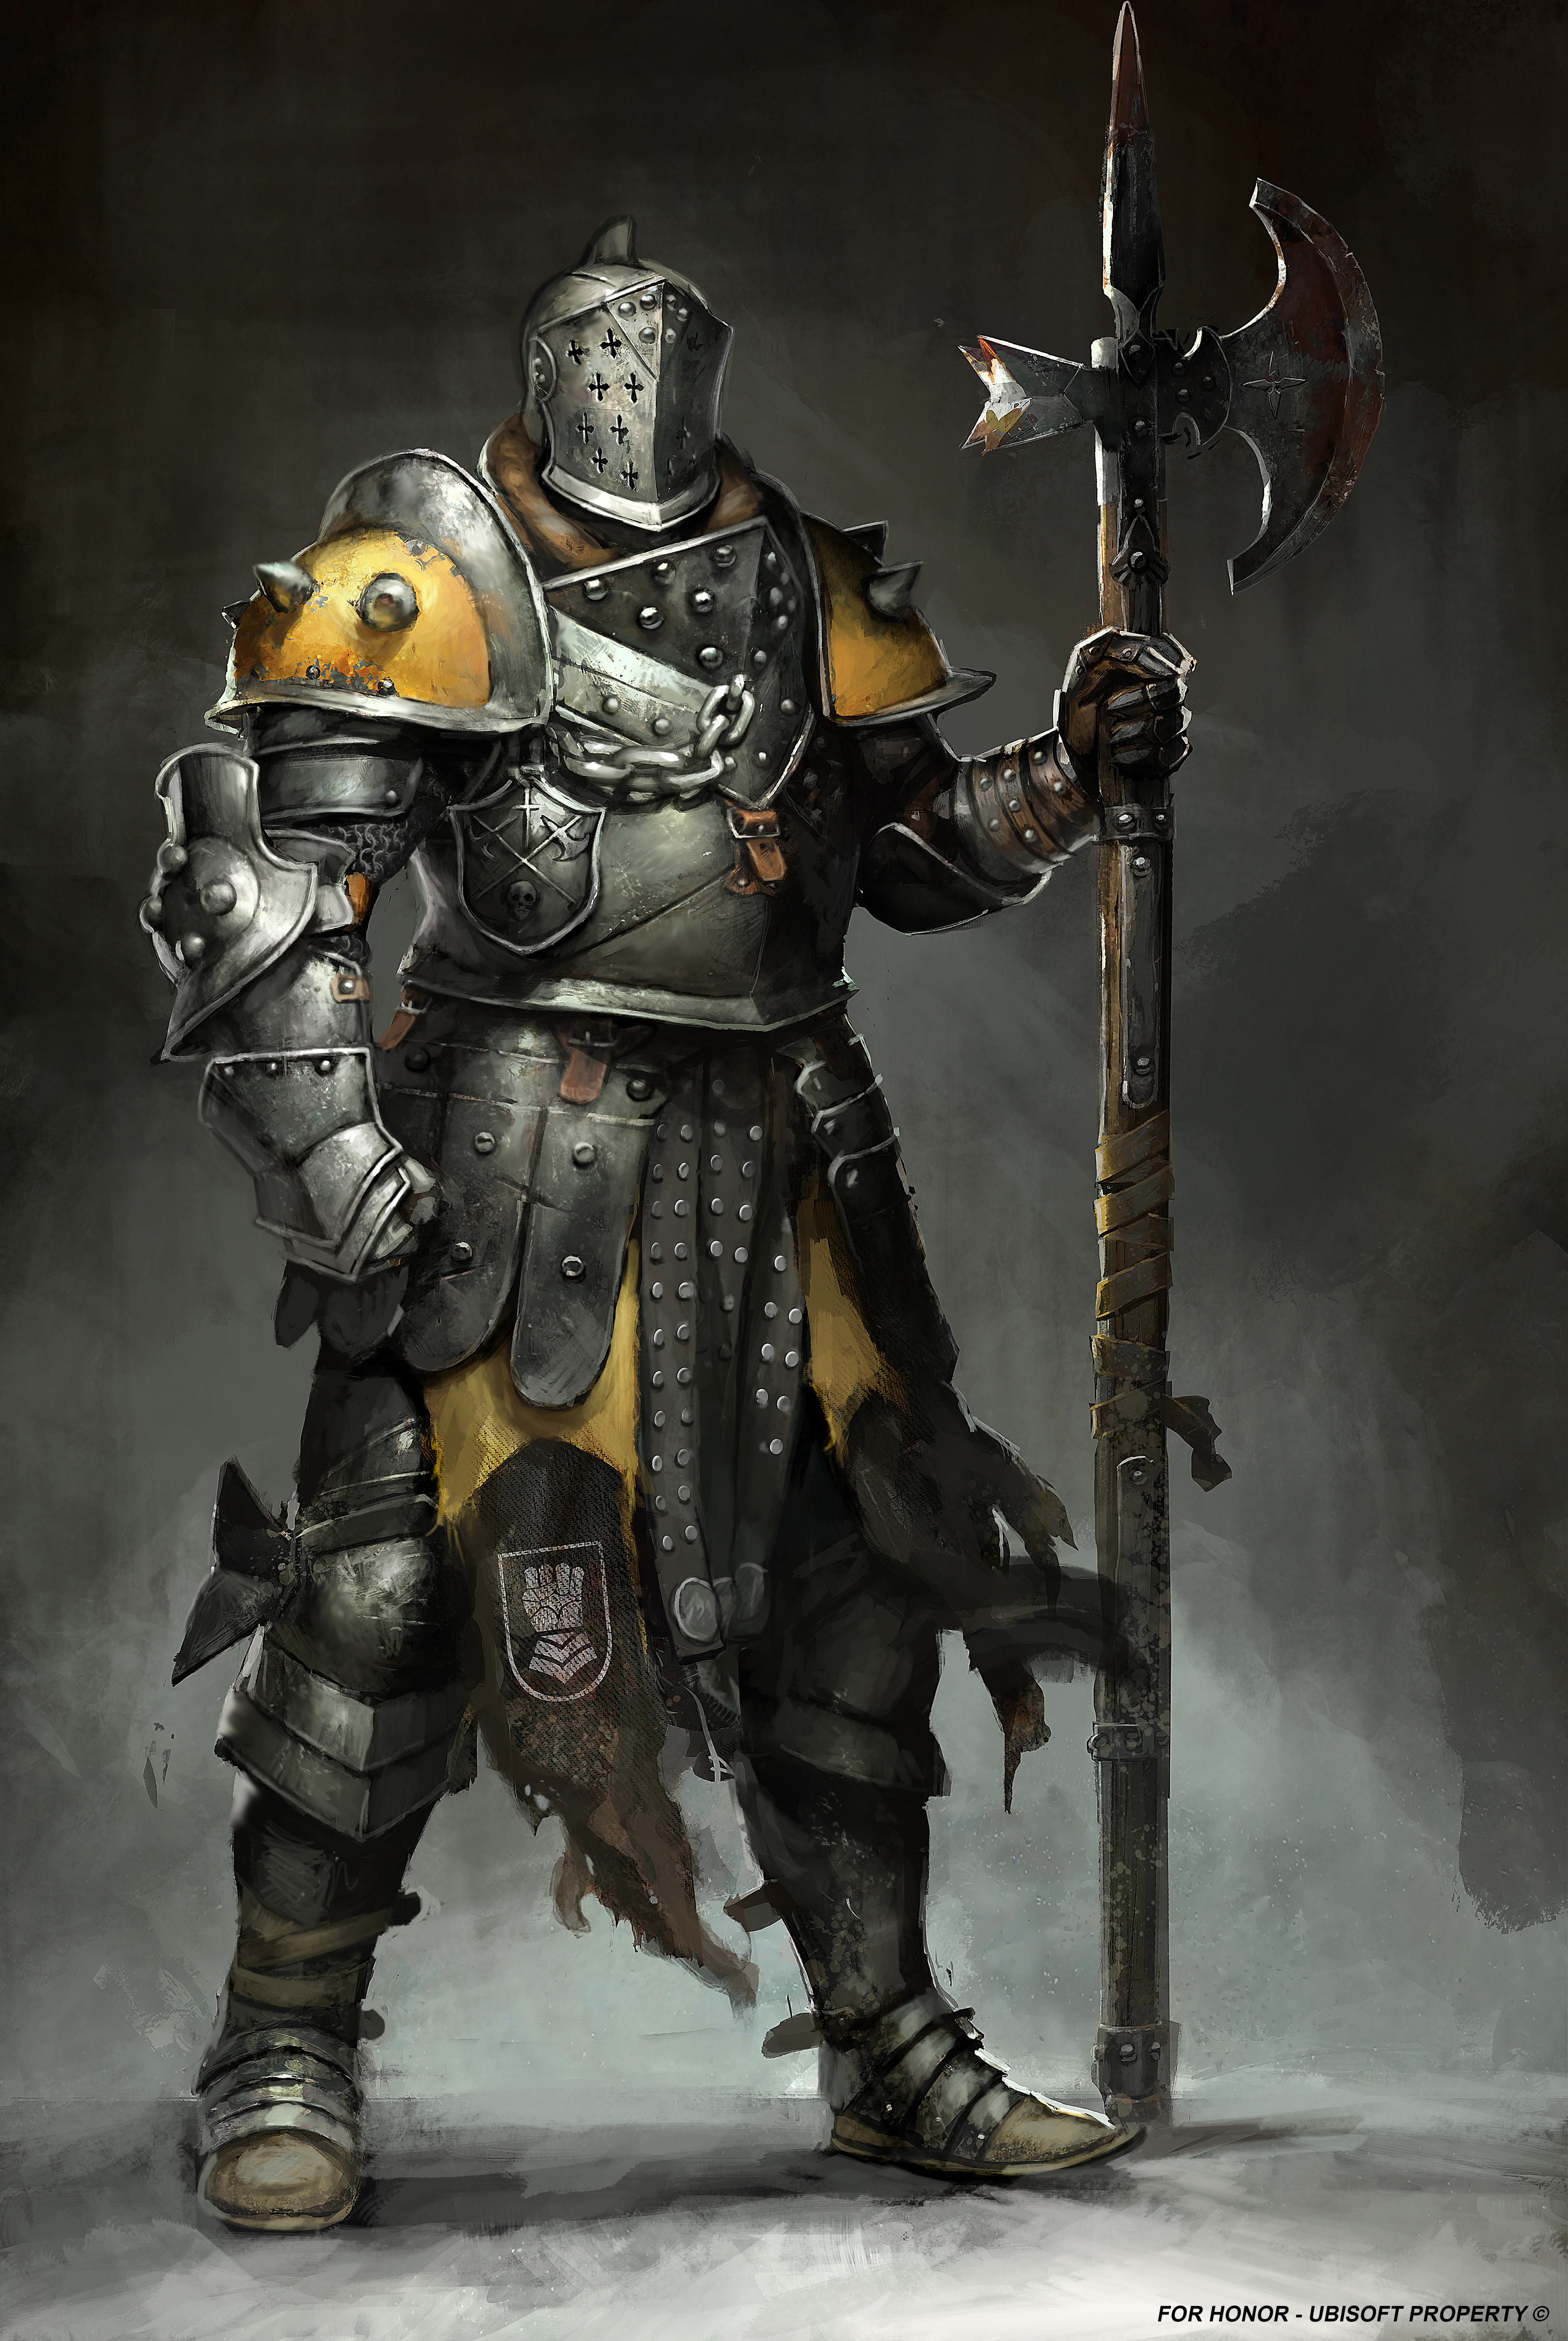 For Honor character concepts.